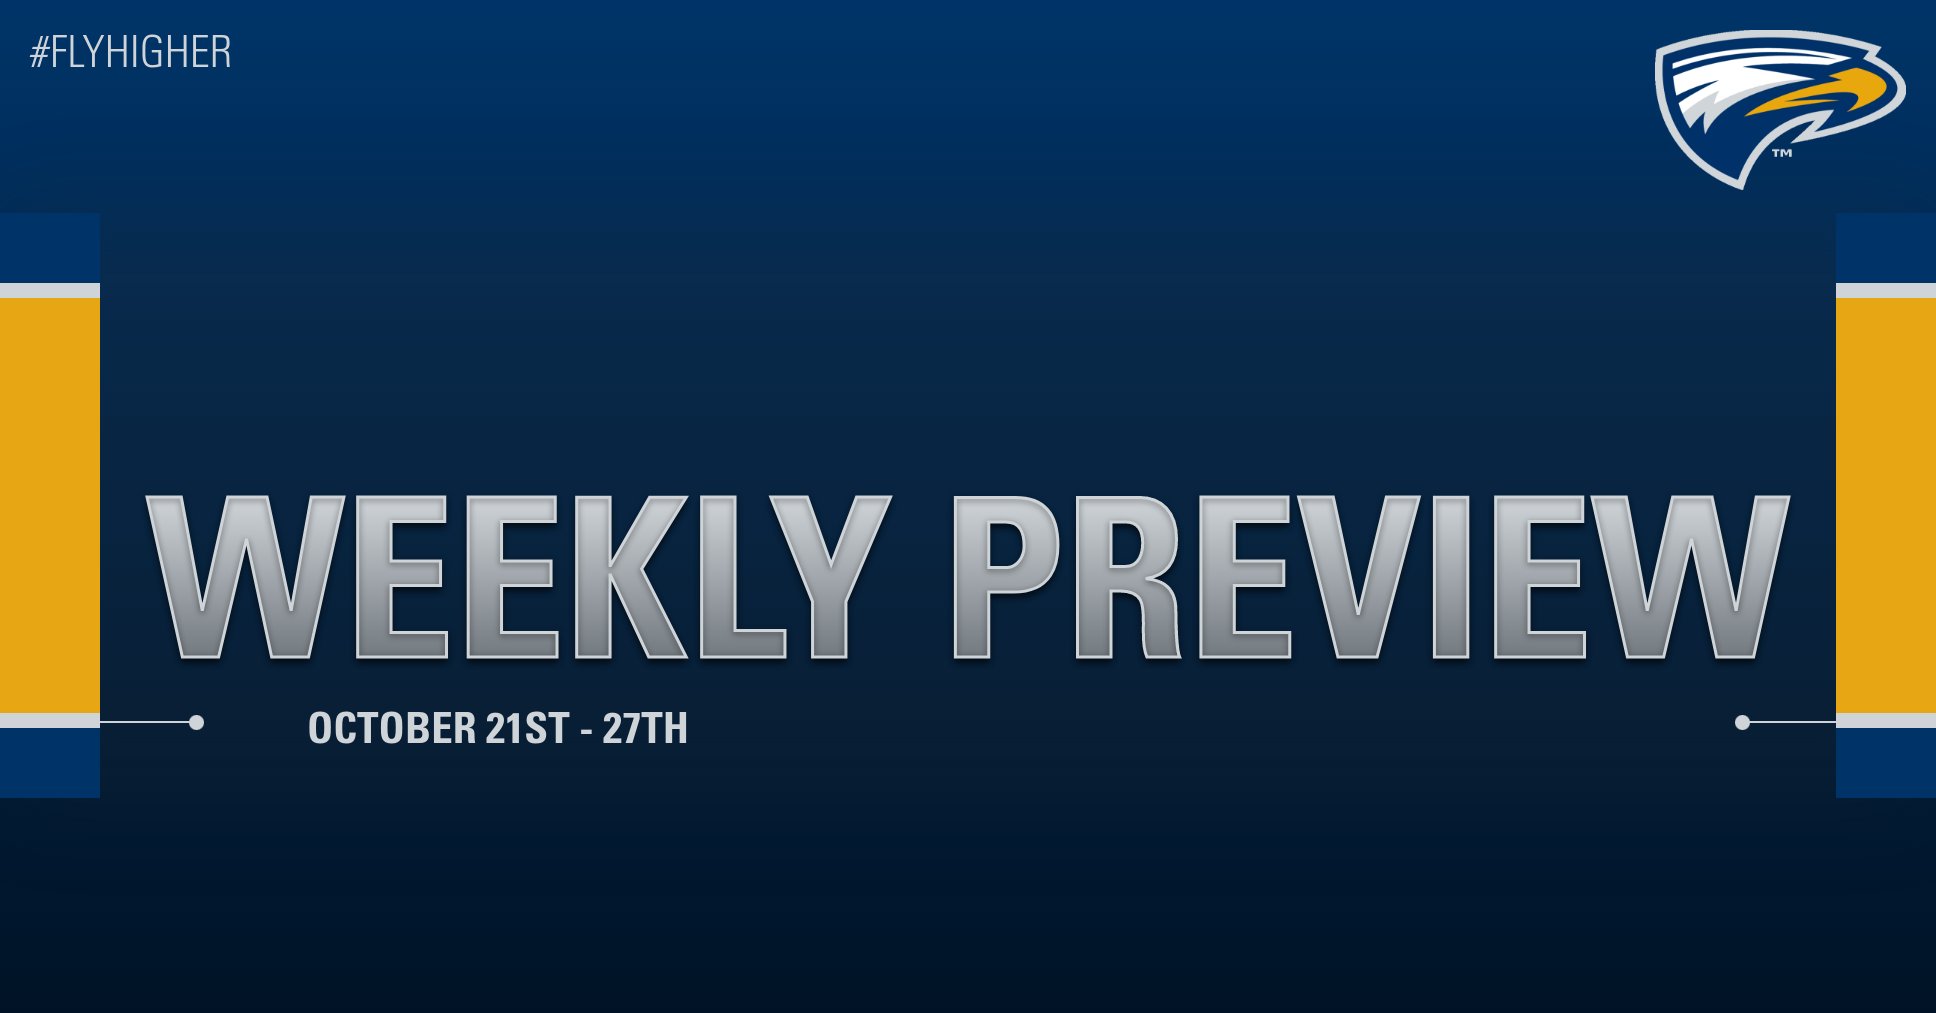 Emory Athletics Weekly Preview October 21st - 27th